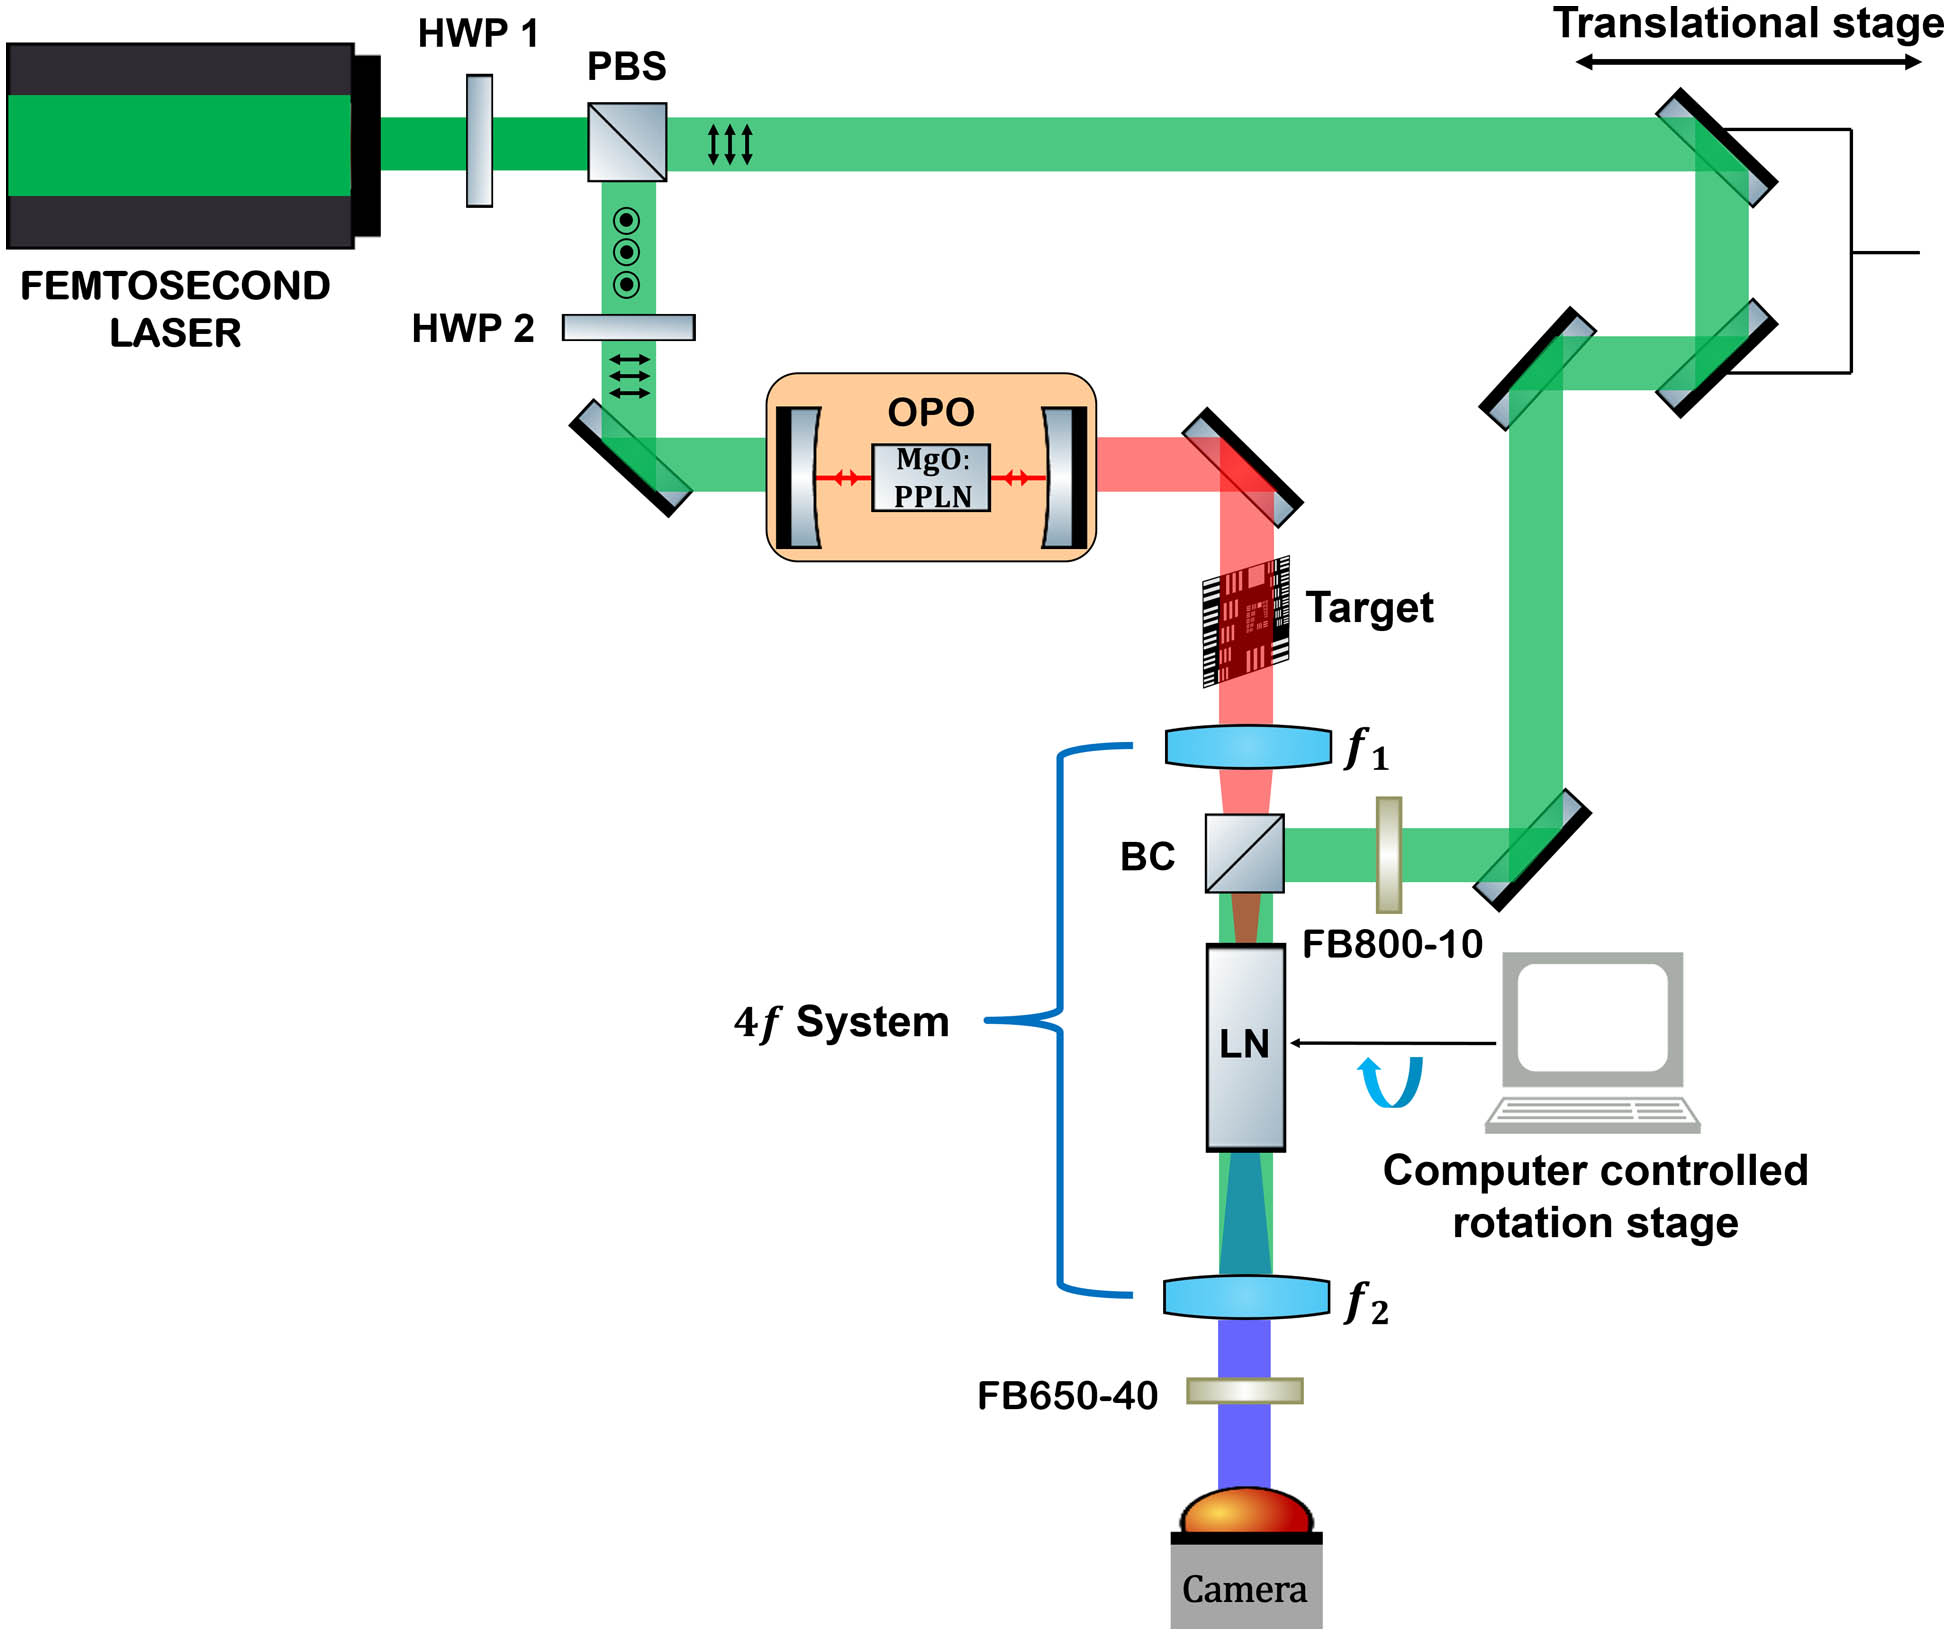 Schematic of the experimental setup used for mid-IR femtosecond upconversion imaging. HWP, half-wave plate; PBS, polarizing beam splitter; OPO, optical parametric oscillator; BC, beam combiner; LN, lithium niobate crystal; MgO:PPLN, magnesium oxide-doped periodically poled LN crystal; f, lenses.